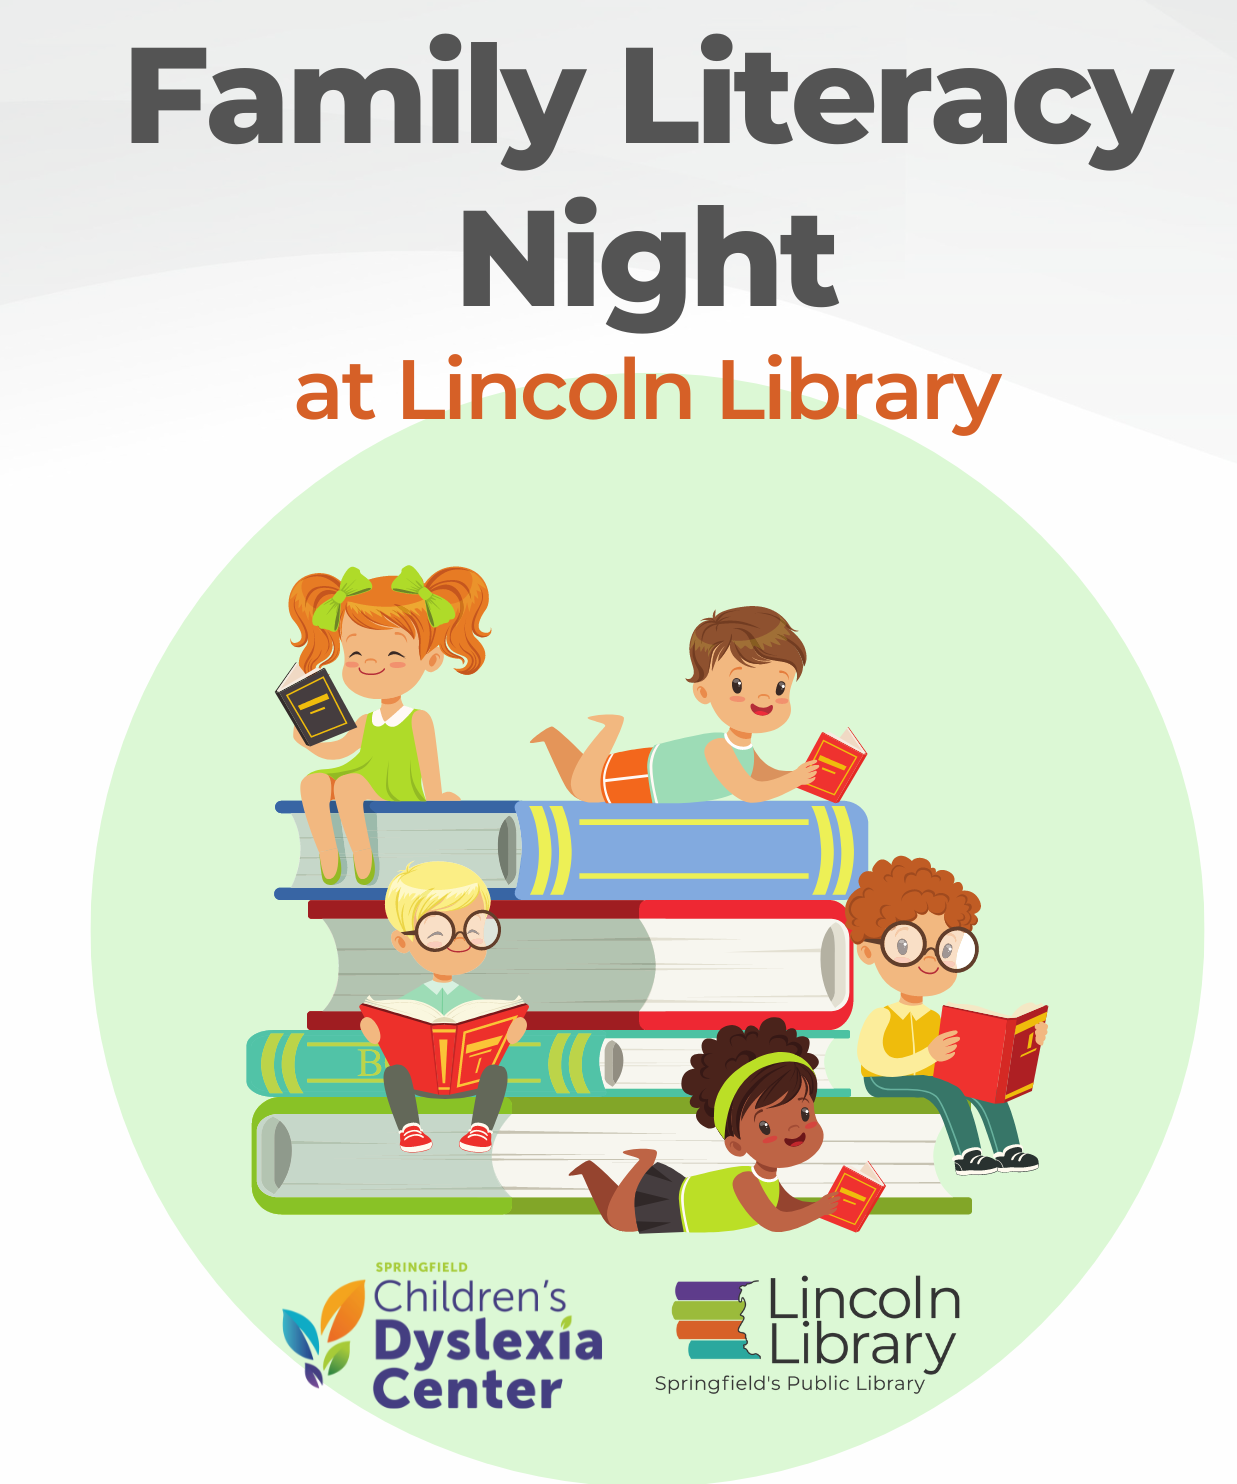 An illustration of a  group of children sitting on and around a pile of books. The words "Family Literacy Night at Lincoln Library" appear at the top, along with the logos for the library and the Children's Dyslexia Center